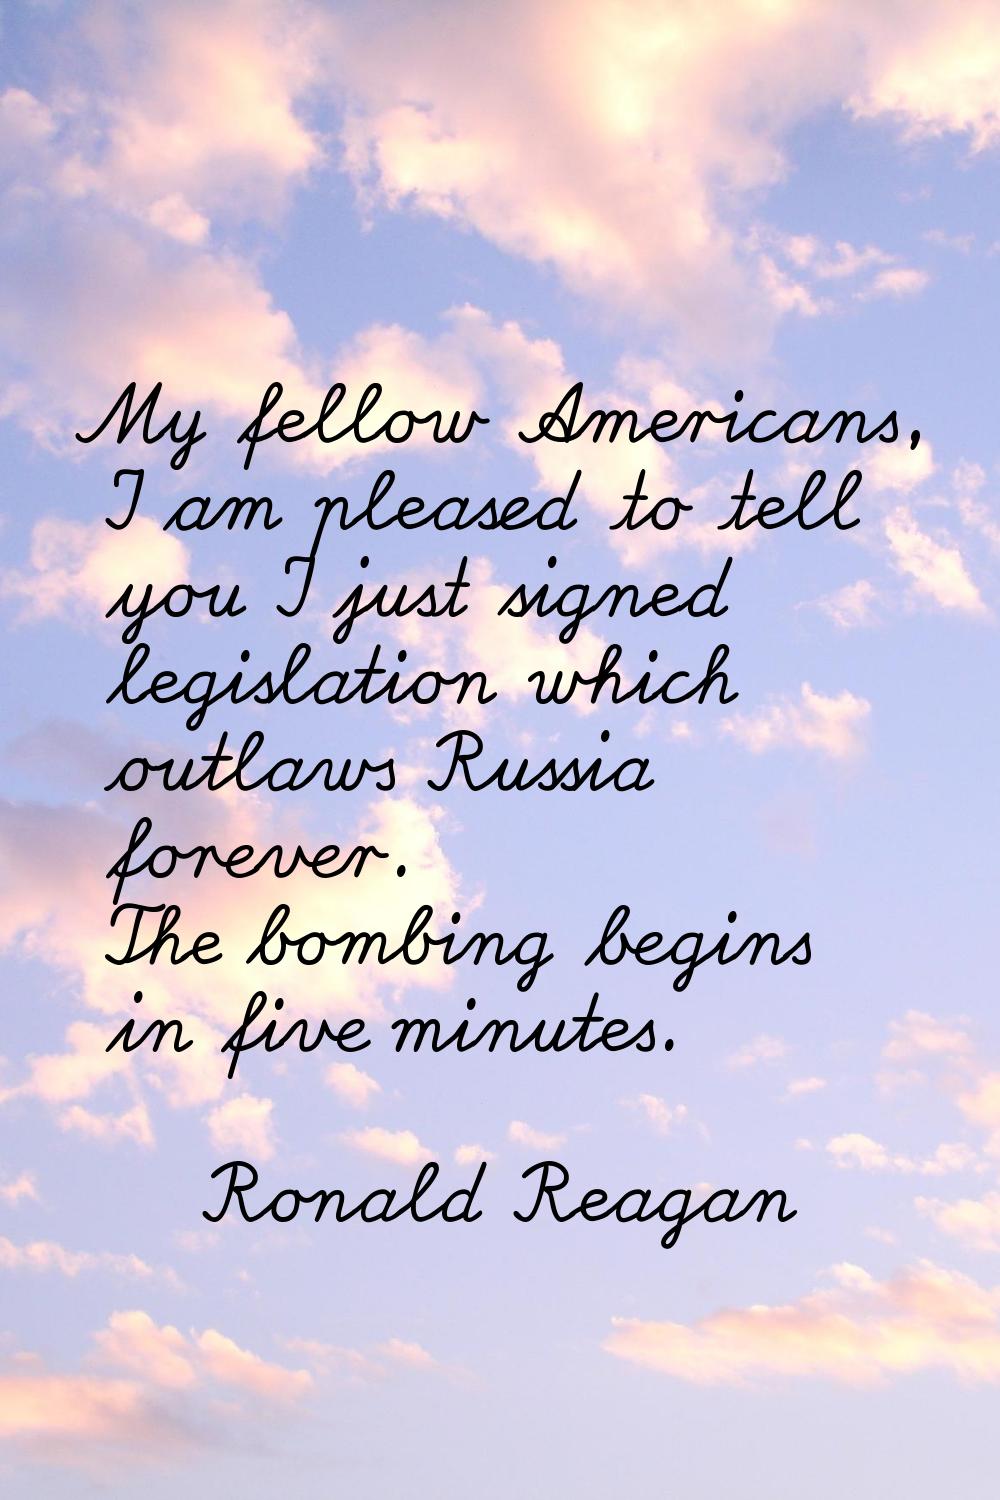 My fellow Americans, I am pleased to tell you I just signed legislation which outlaws Russia foreve